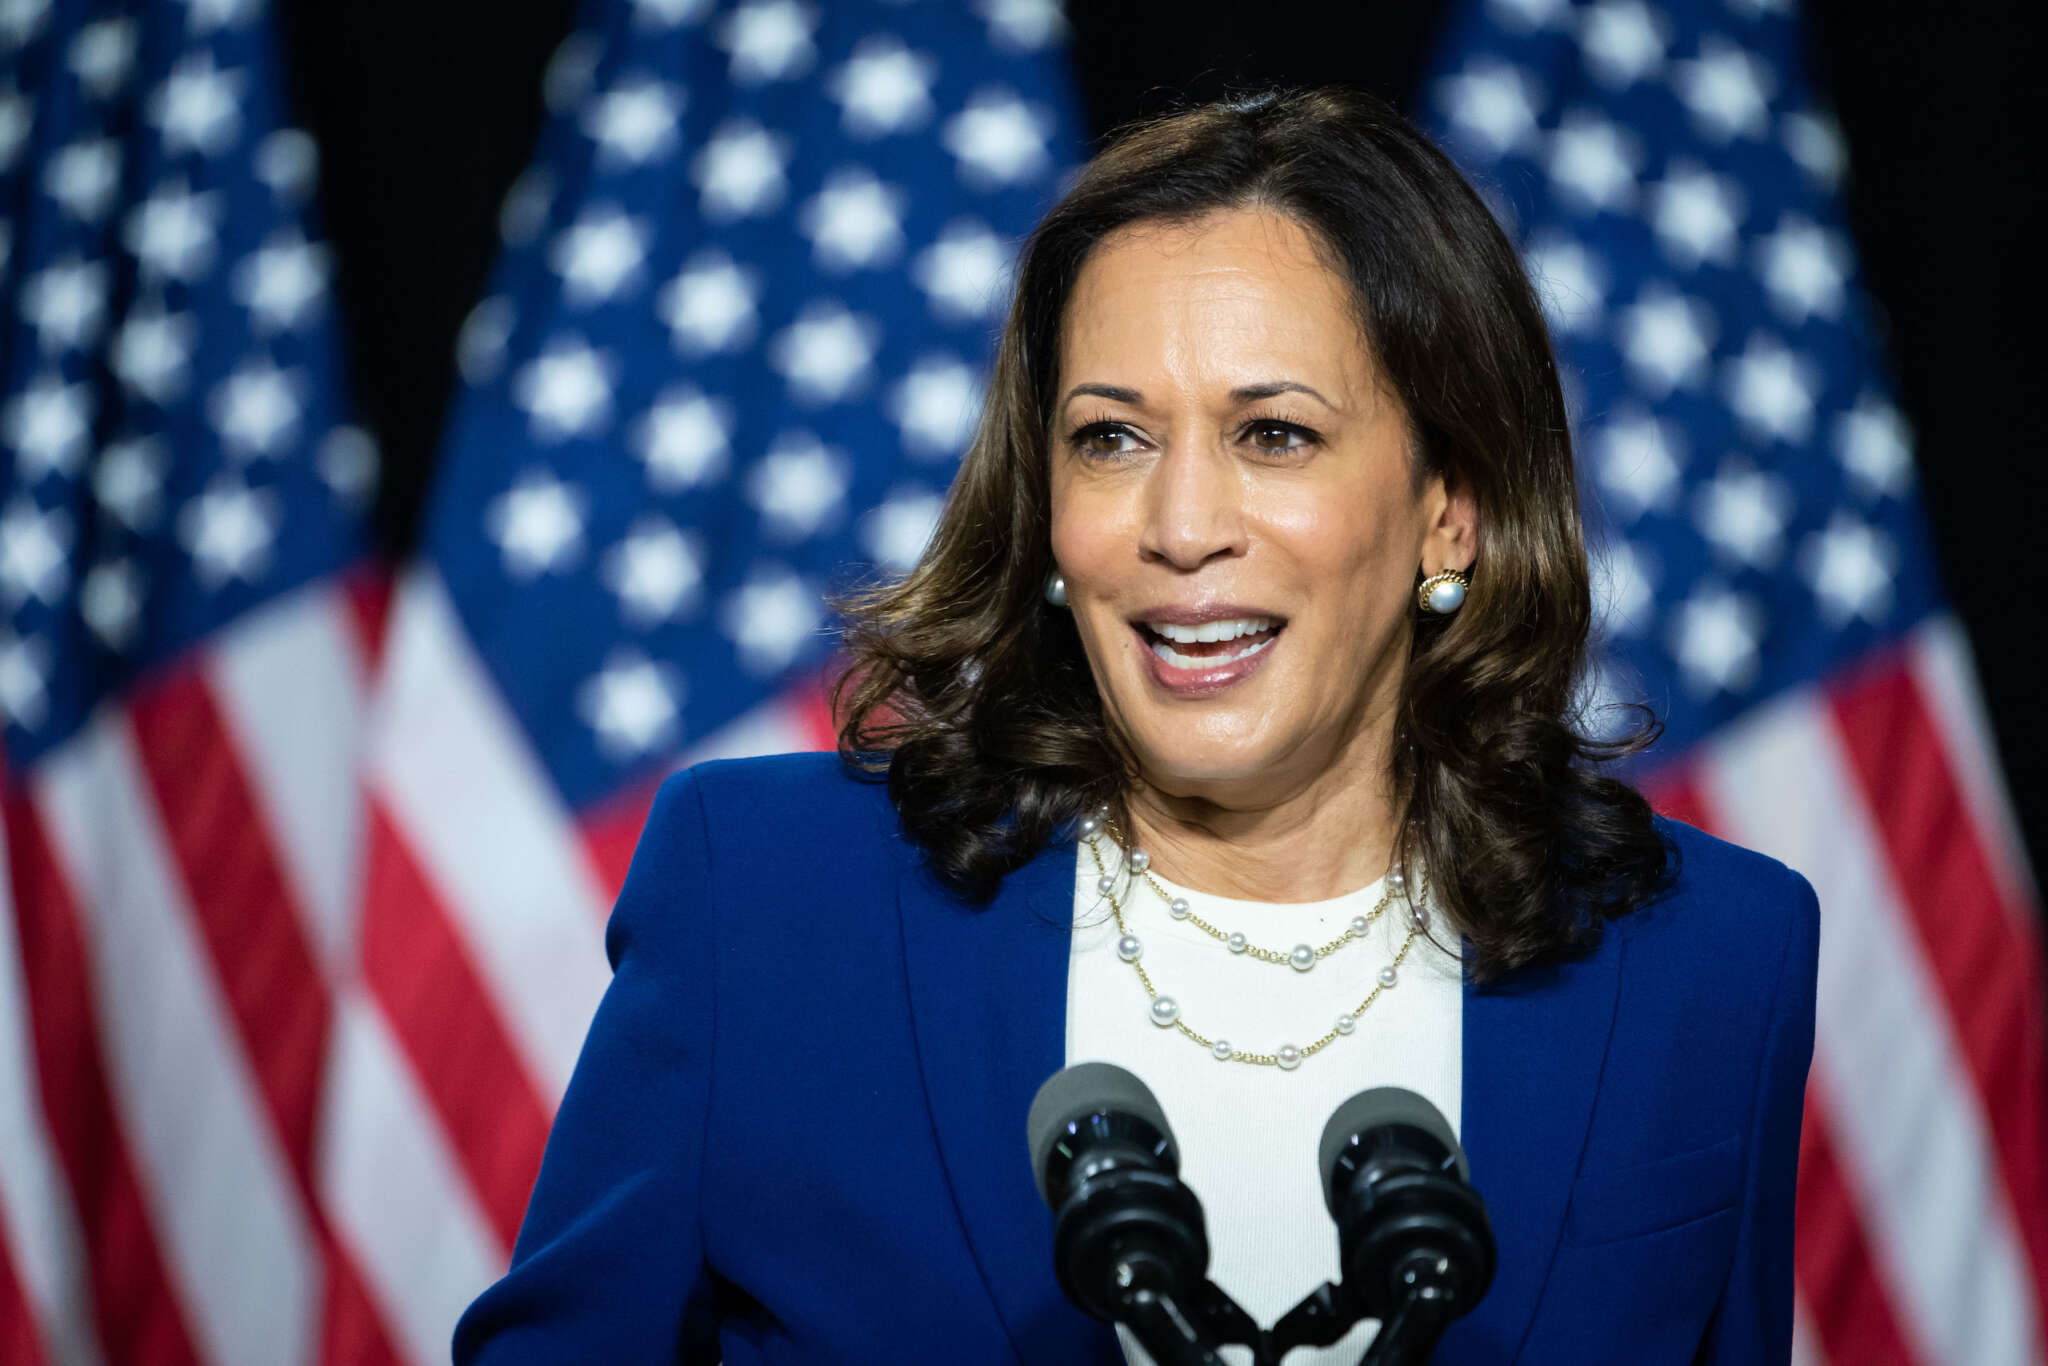 Kamala Harris Insists That ‘You Don’t Meet Hate With Hate’ While Discussing The Deep Divide In America